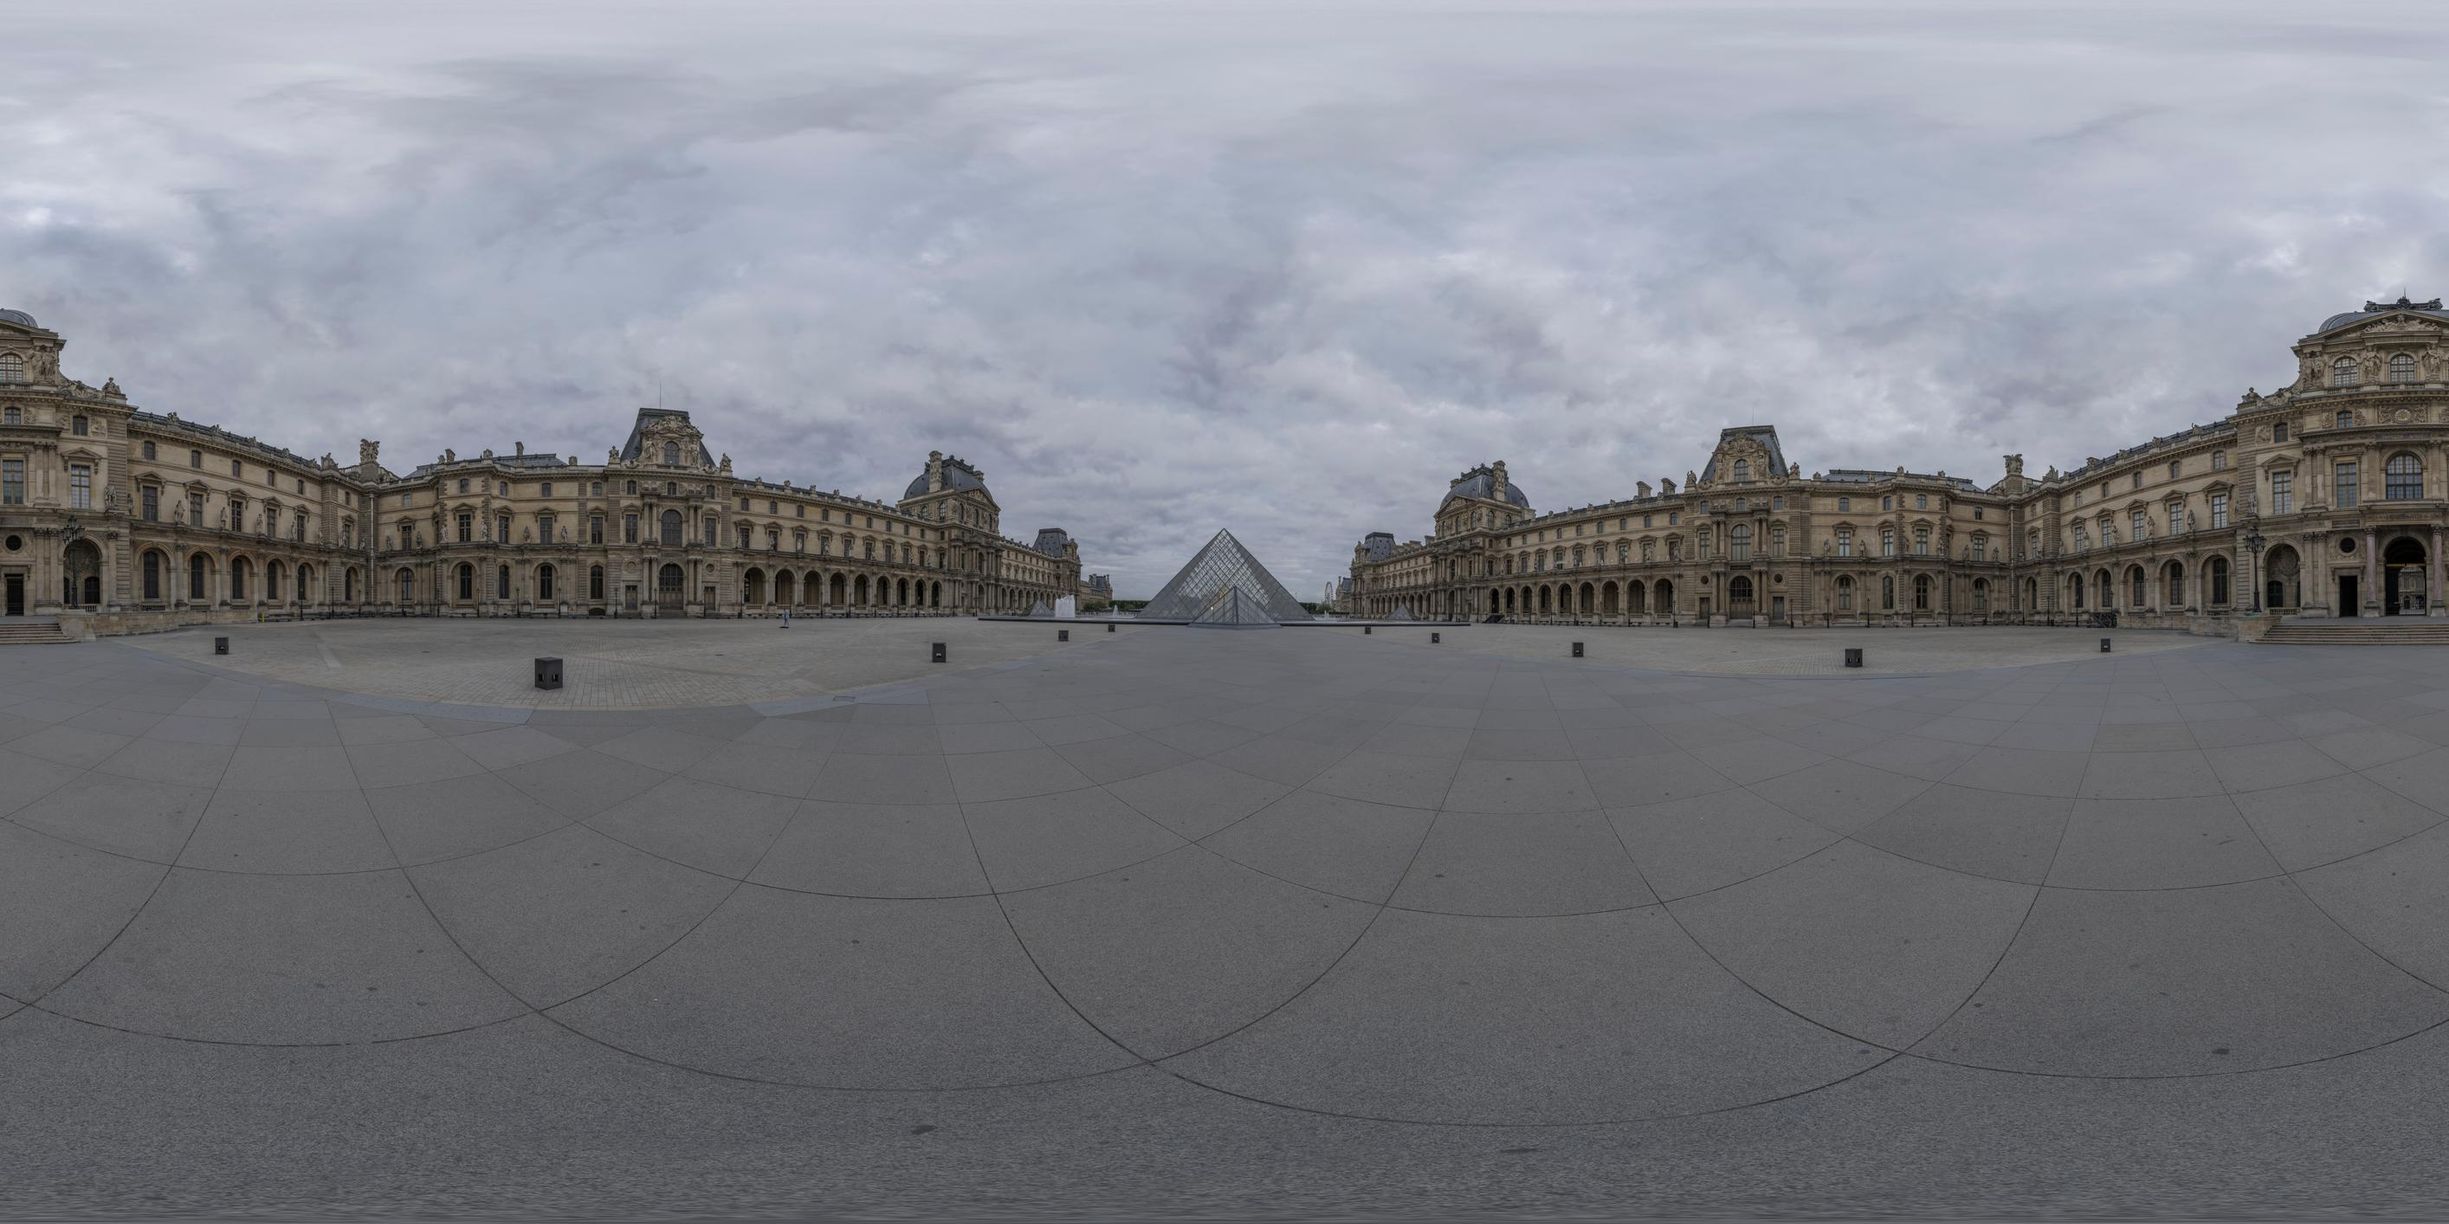 an abstract view of some buildings and a cloudy sky in paris's louvre park